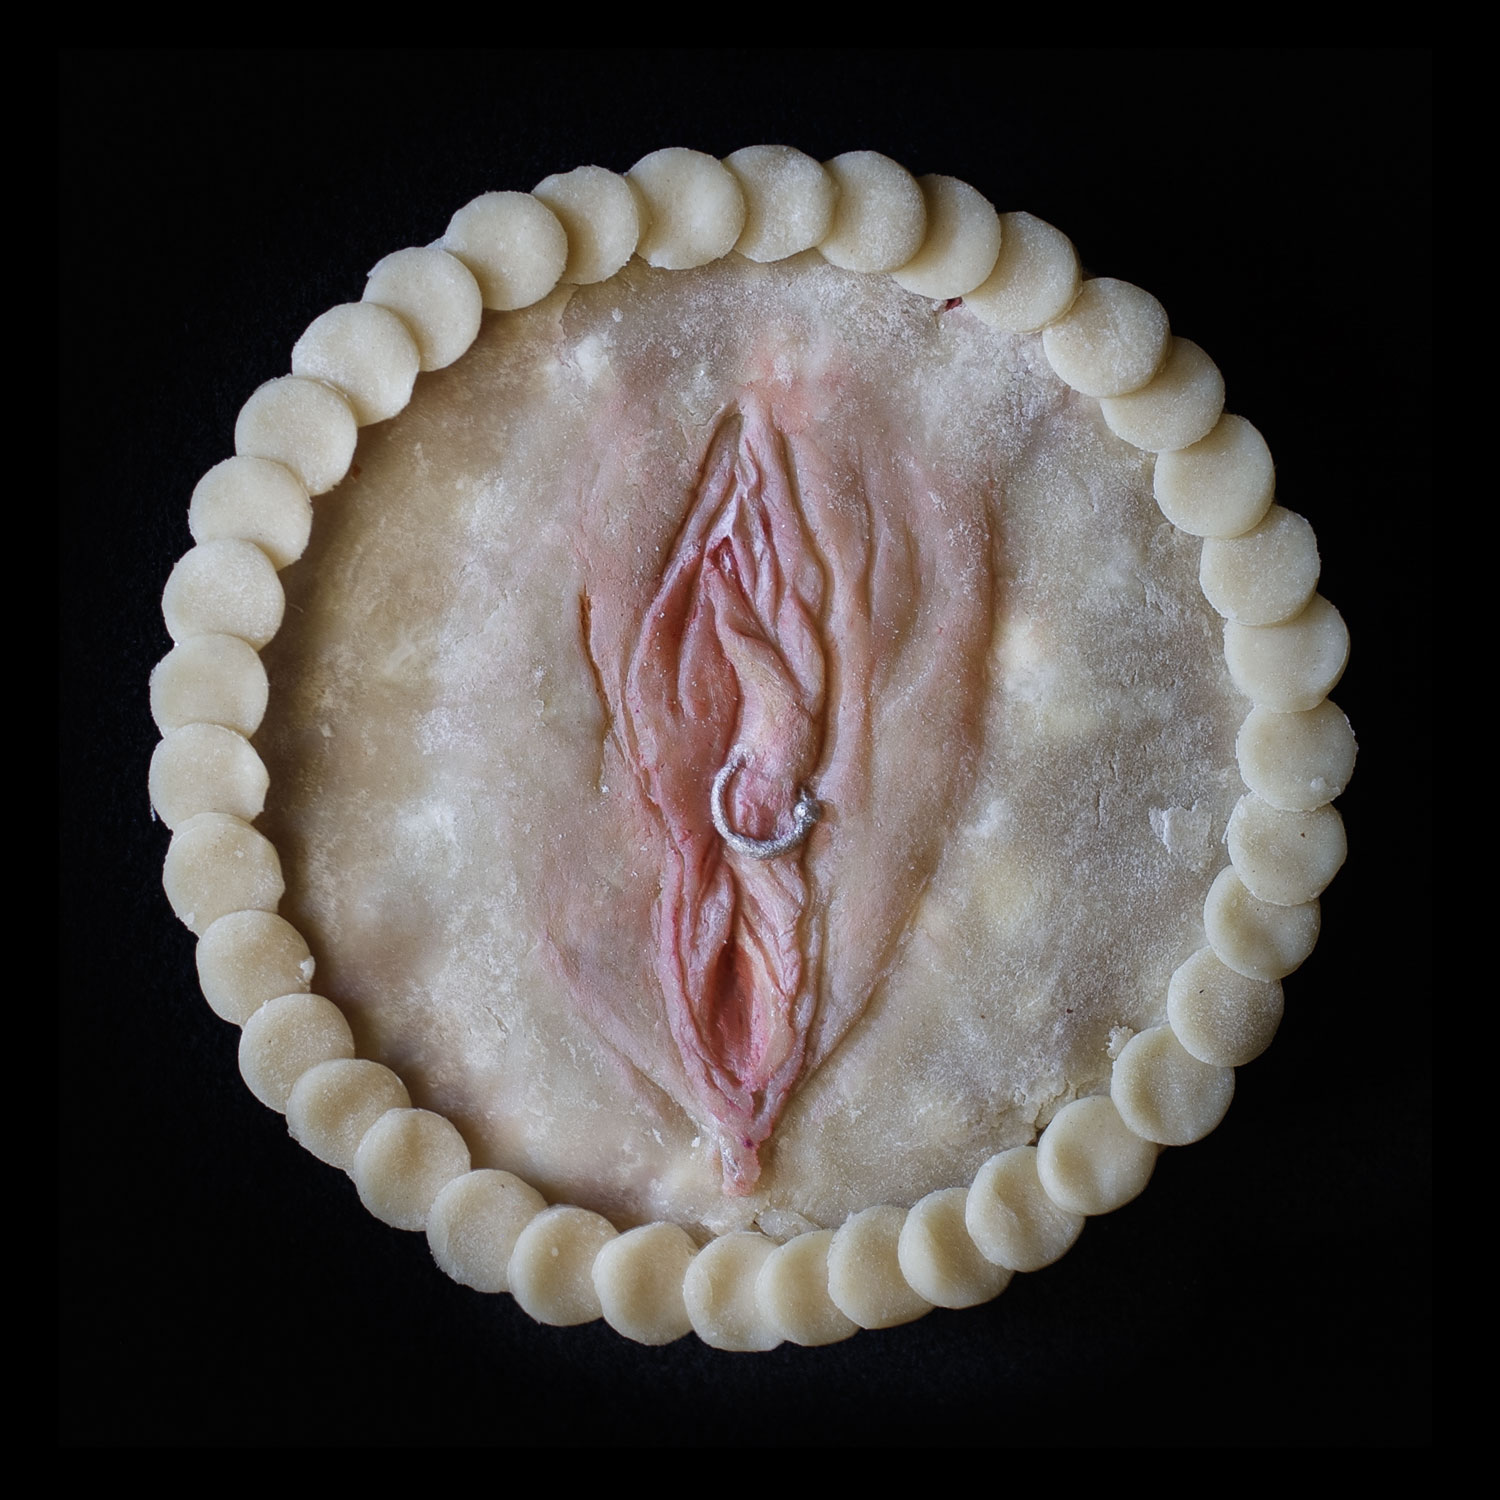 Pie created in the likeness of a vulva. The pie in on a black background with overlapping pie crust circles for the border. The vulva has a silver piercing through the right labia made of pie dough. 